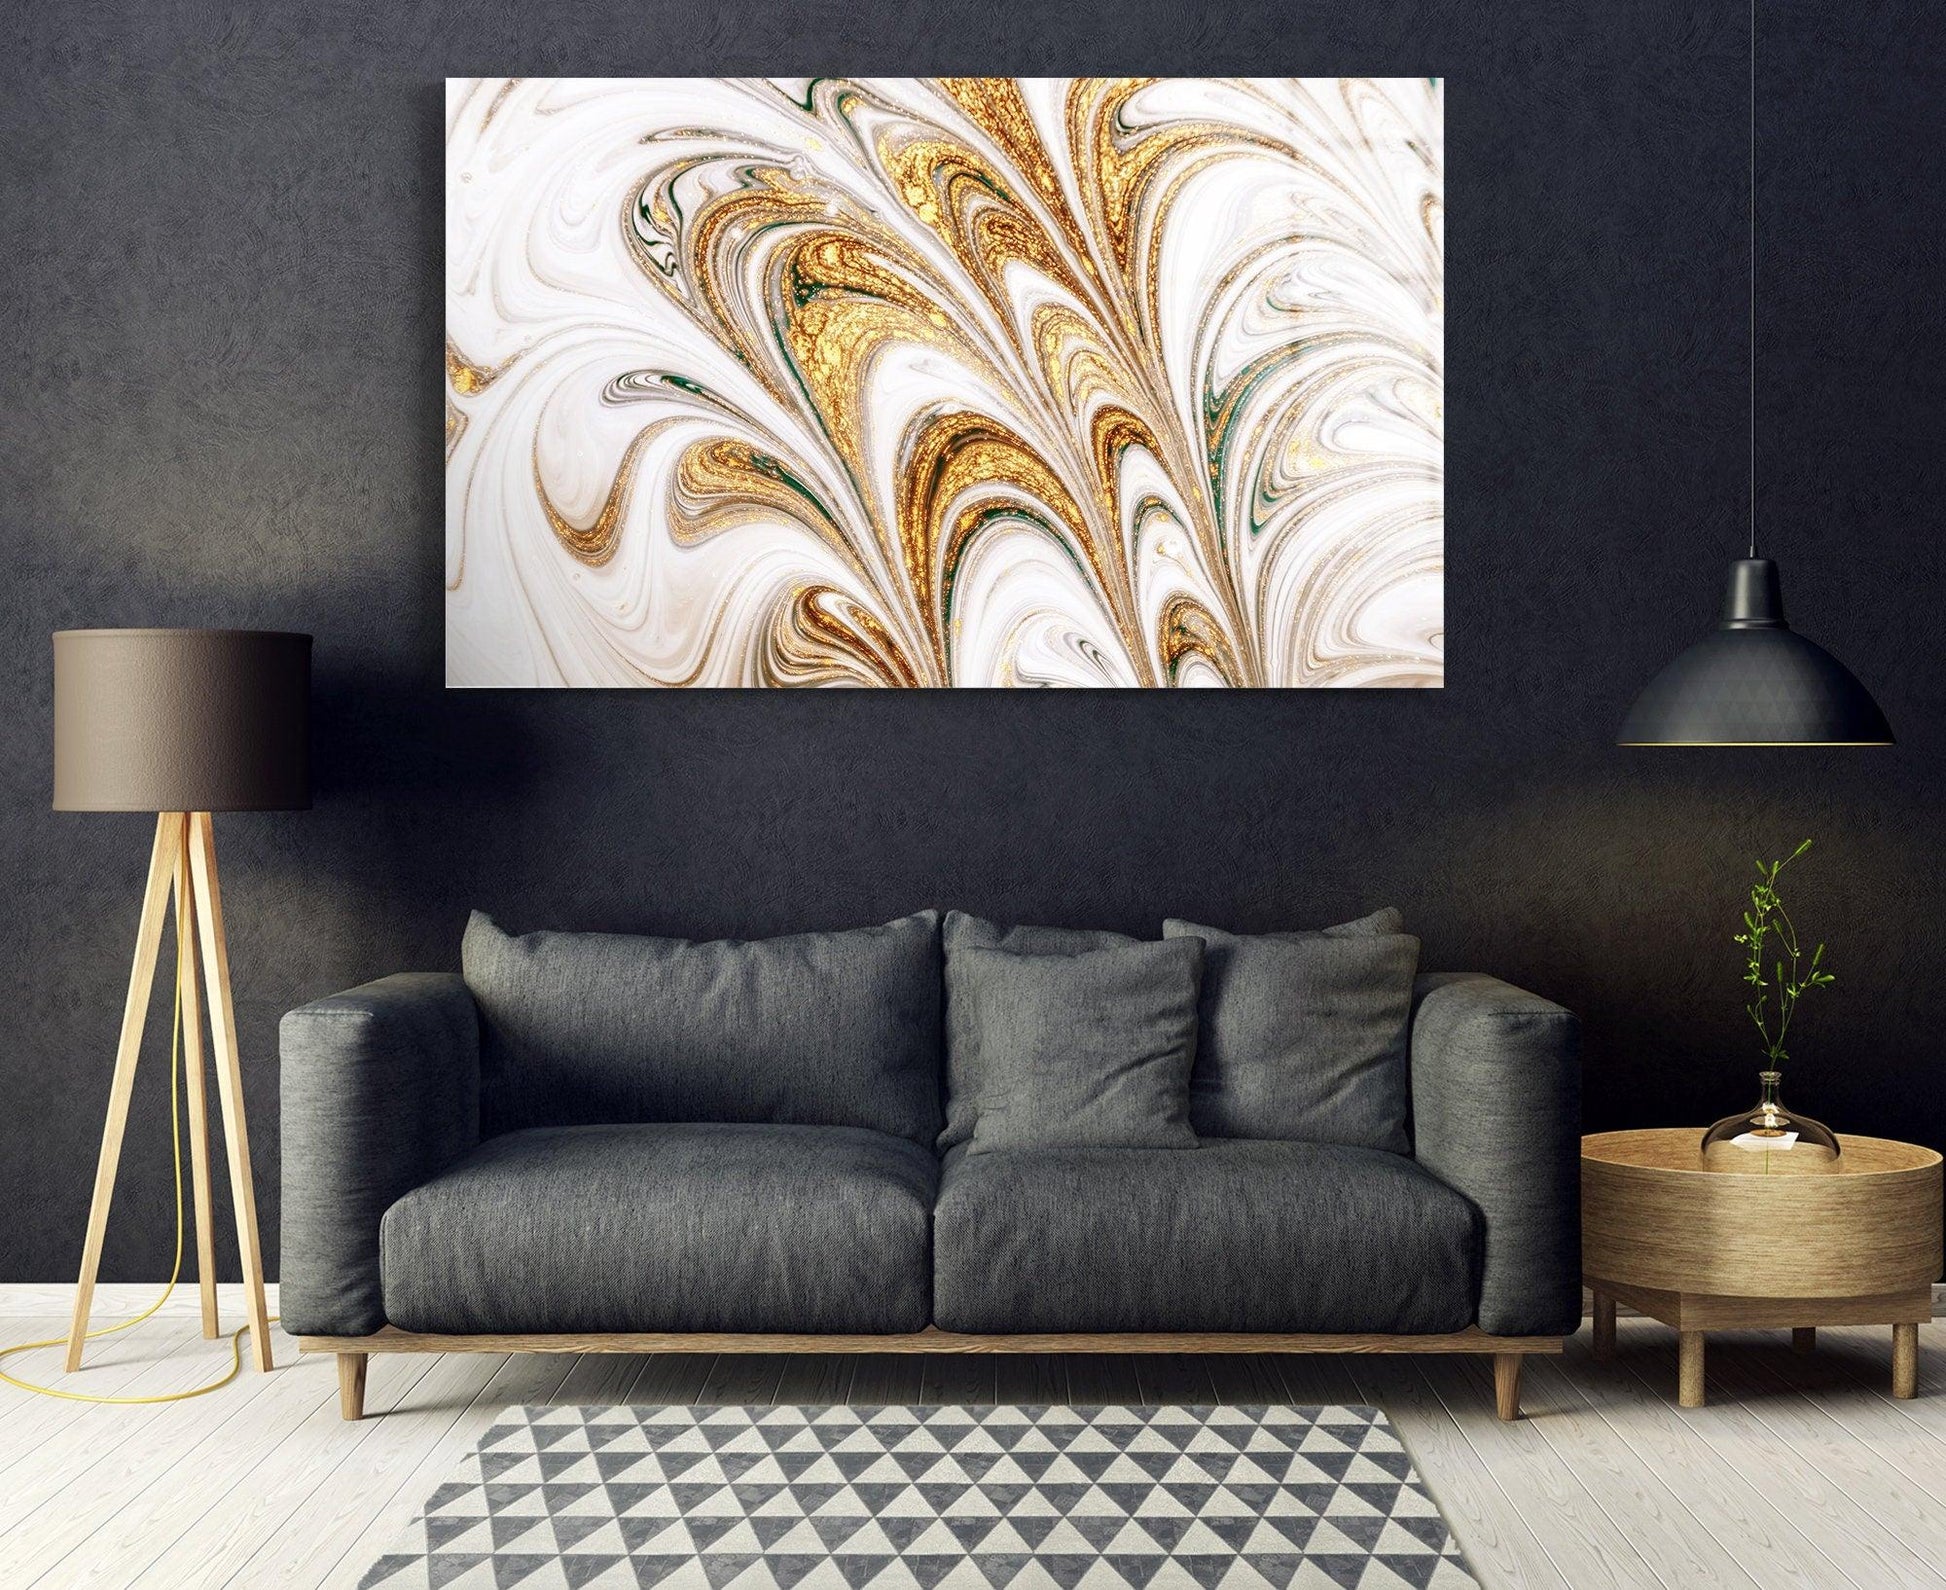 white and Gold glass Wall Art| Gold glass Wall Art, Marble Wall Decor, Gold Wall Decor, Extra Large Wall Art, gold bedroom decor - TrendiArt